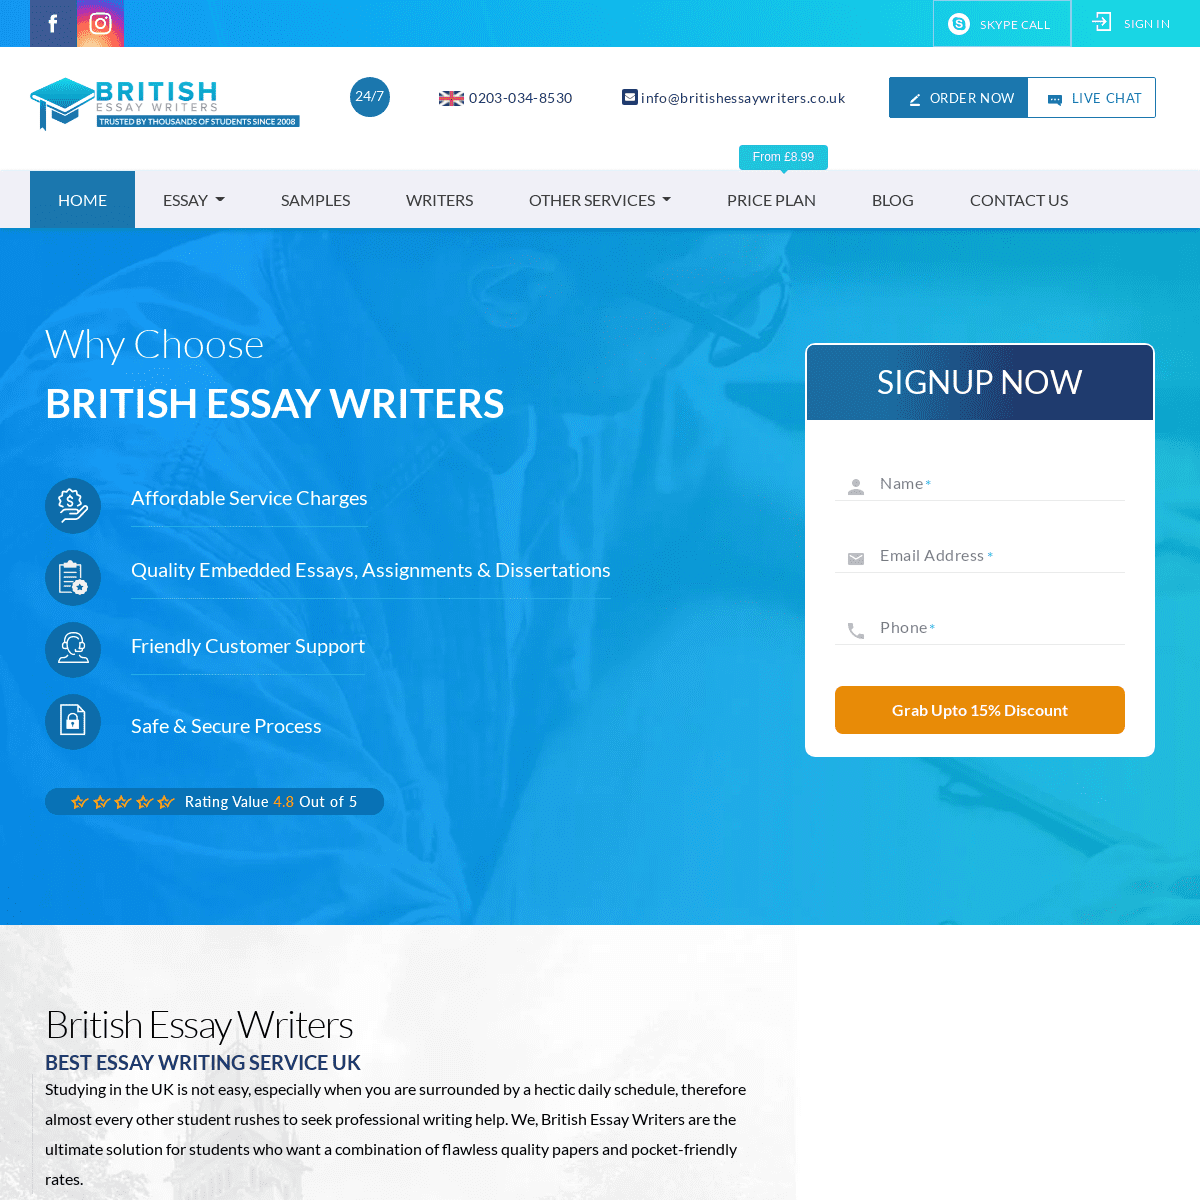 A complete backup of https://britishessaywriters.co.uk